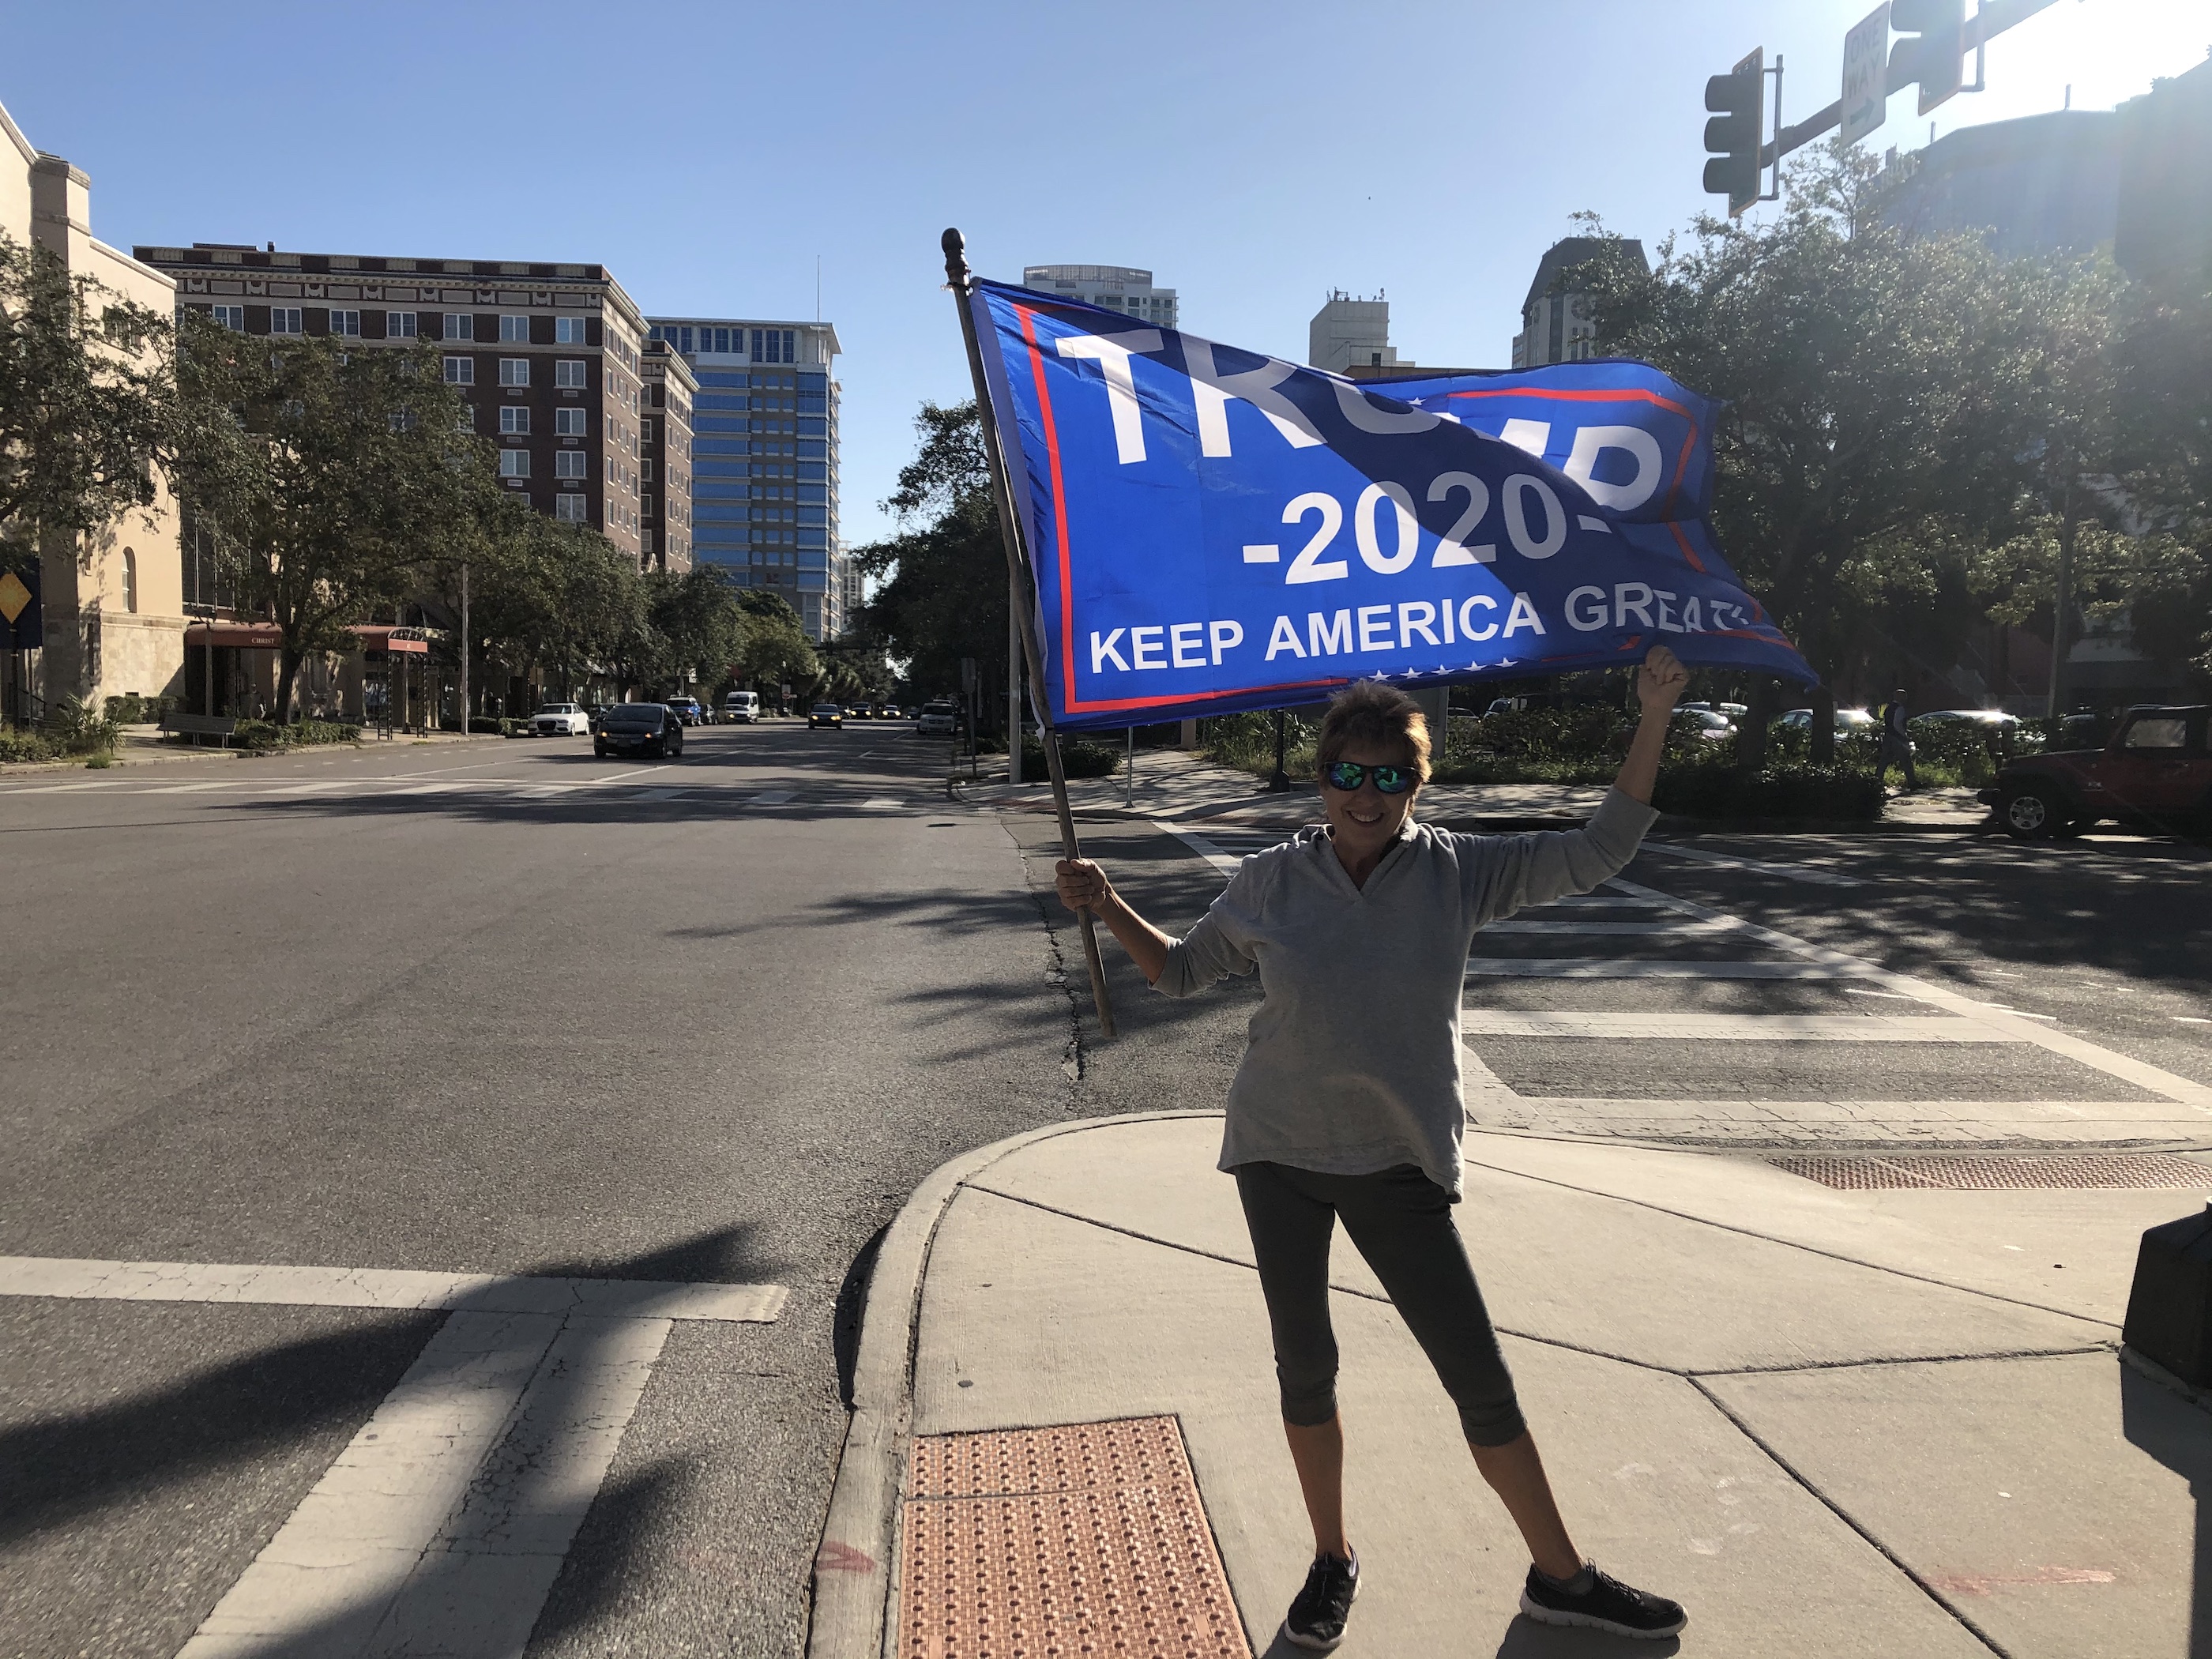  Jeanne Coffin, a Trump supporter, outside a mail-in and absentee voting drop-off site in St. Petersburg, Fl on 3 November (MEE/Sheren Khalel)